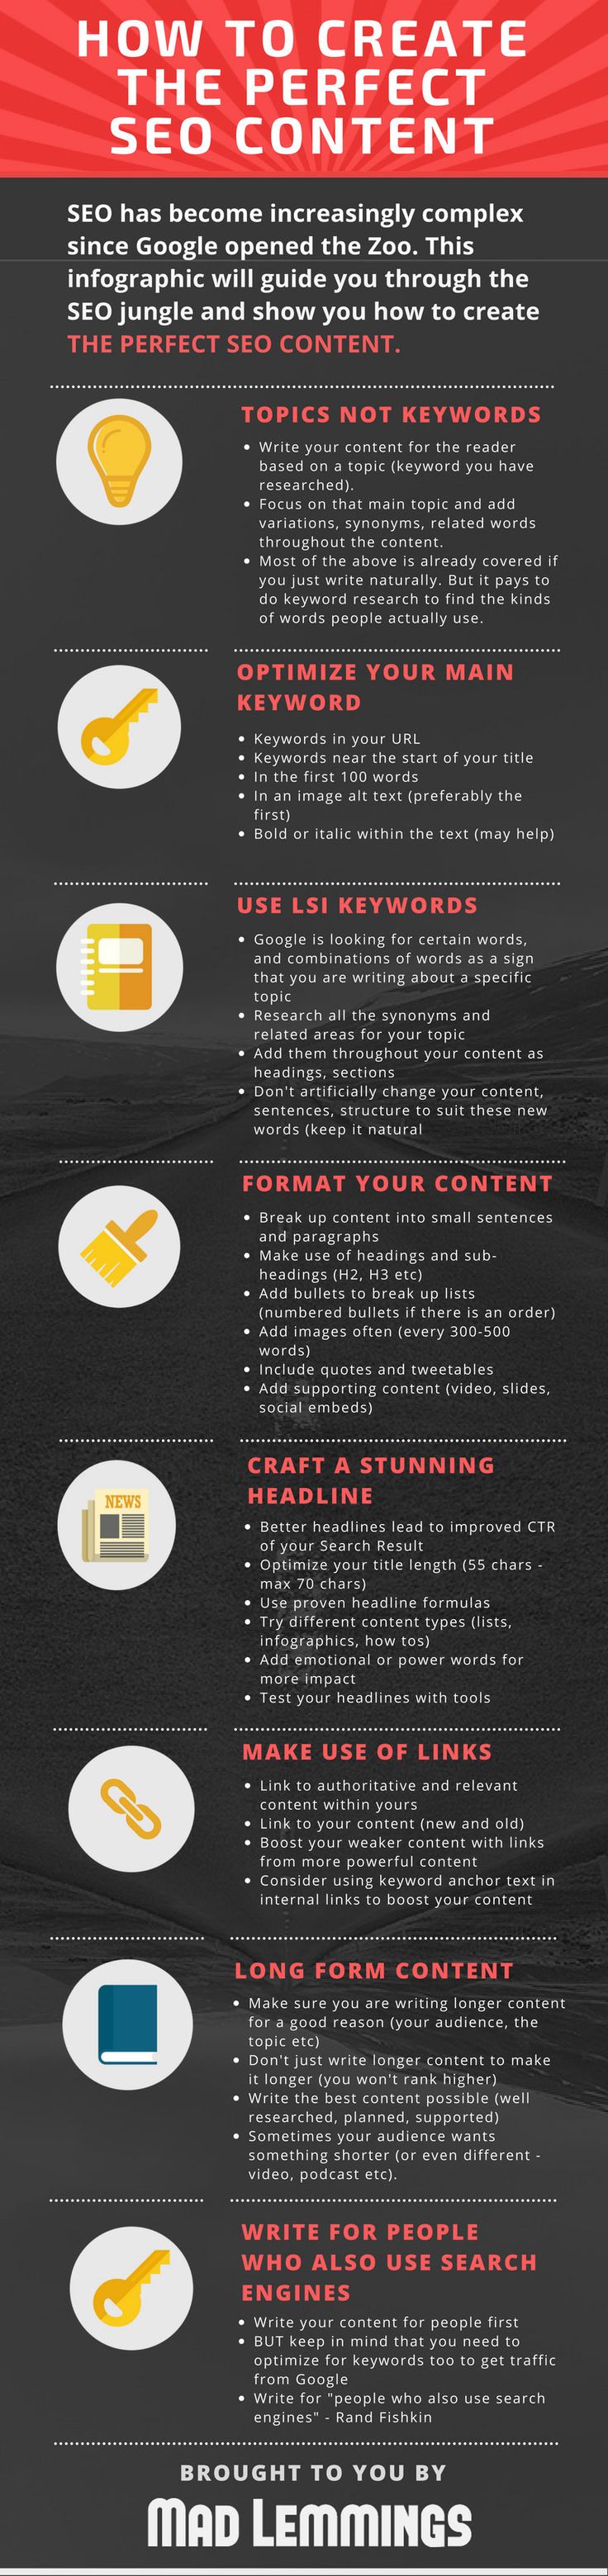 bf2a64942891389784f58bfa9dfcbaef--seo-score-seo-marketing Advertising Infographics : Learn how to create the perfect SEO Content without all the stress. Everything...